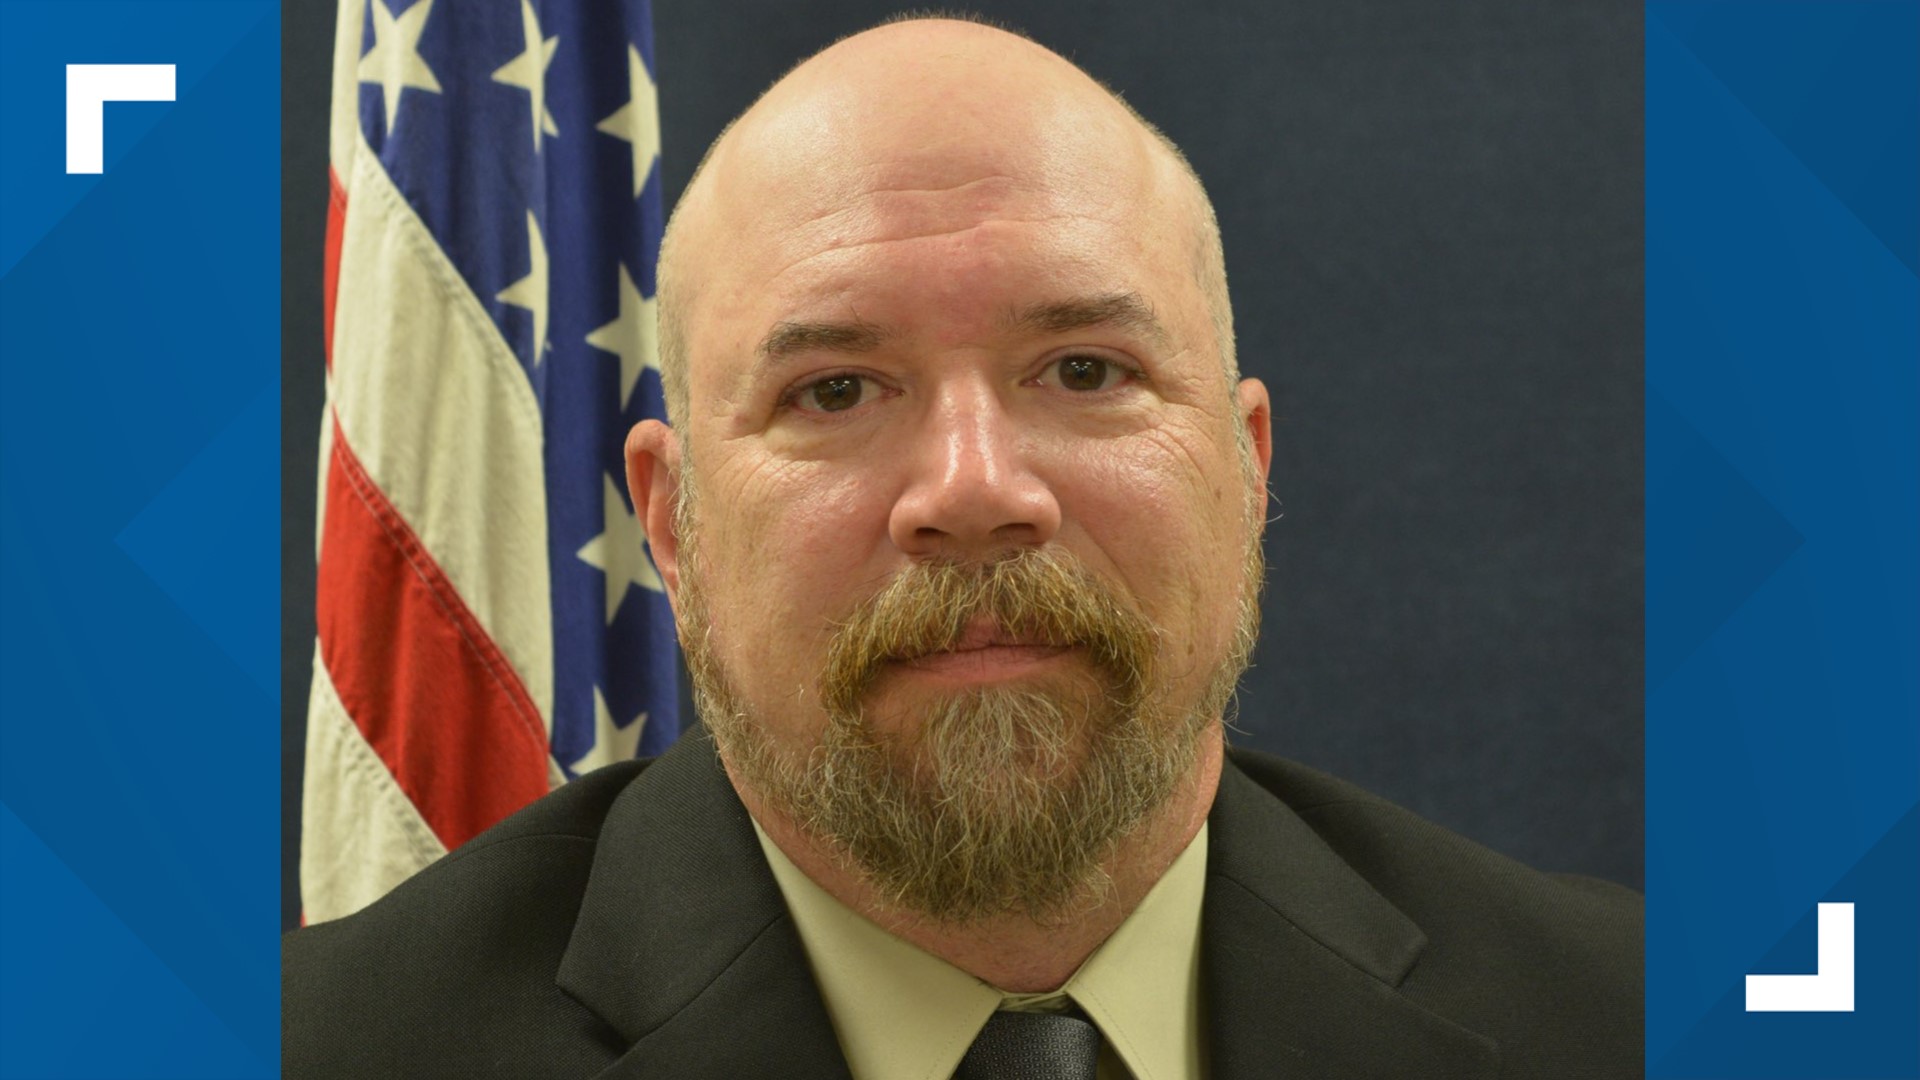 Detective Greg Ferency died Wednesday, July 7 in an ambush at a federal building in Terre Haute.